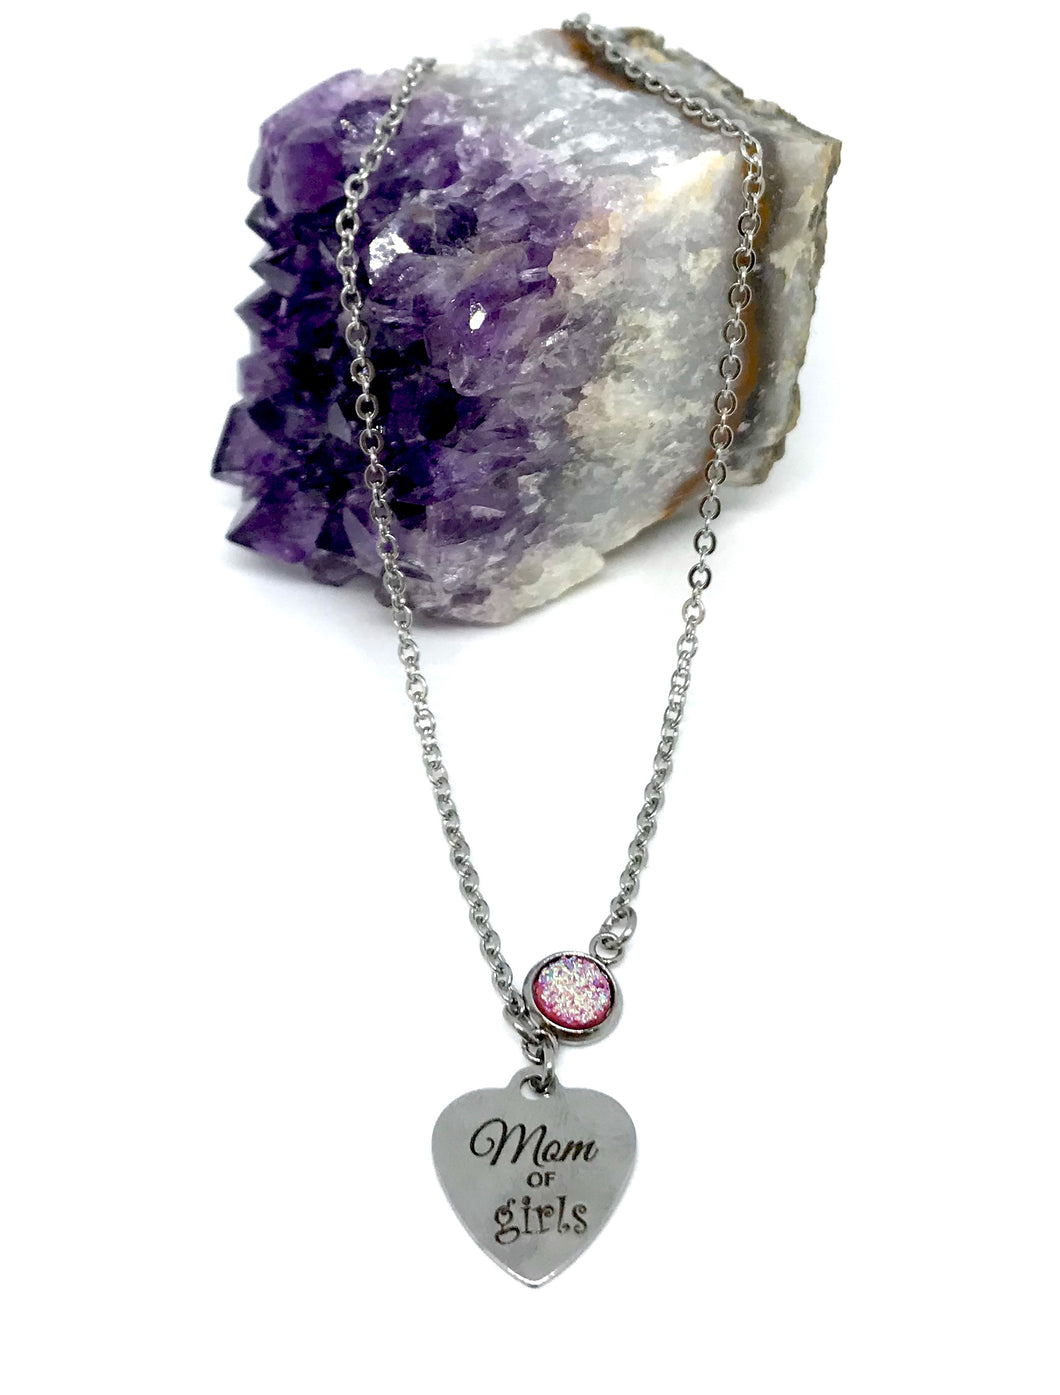 Mom of Girls Necklace with One Birthstone (Stainless Steel)